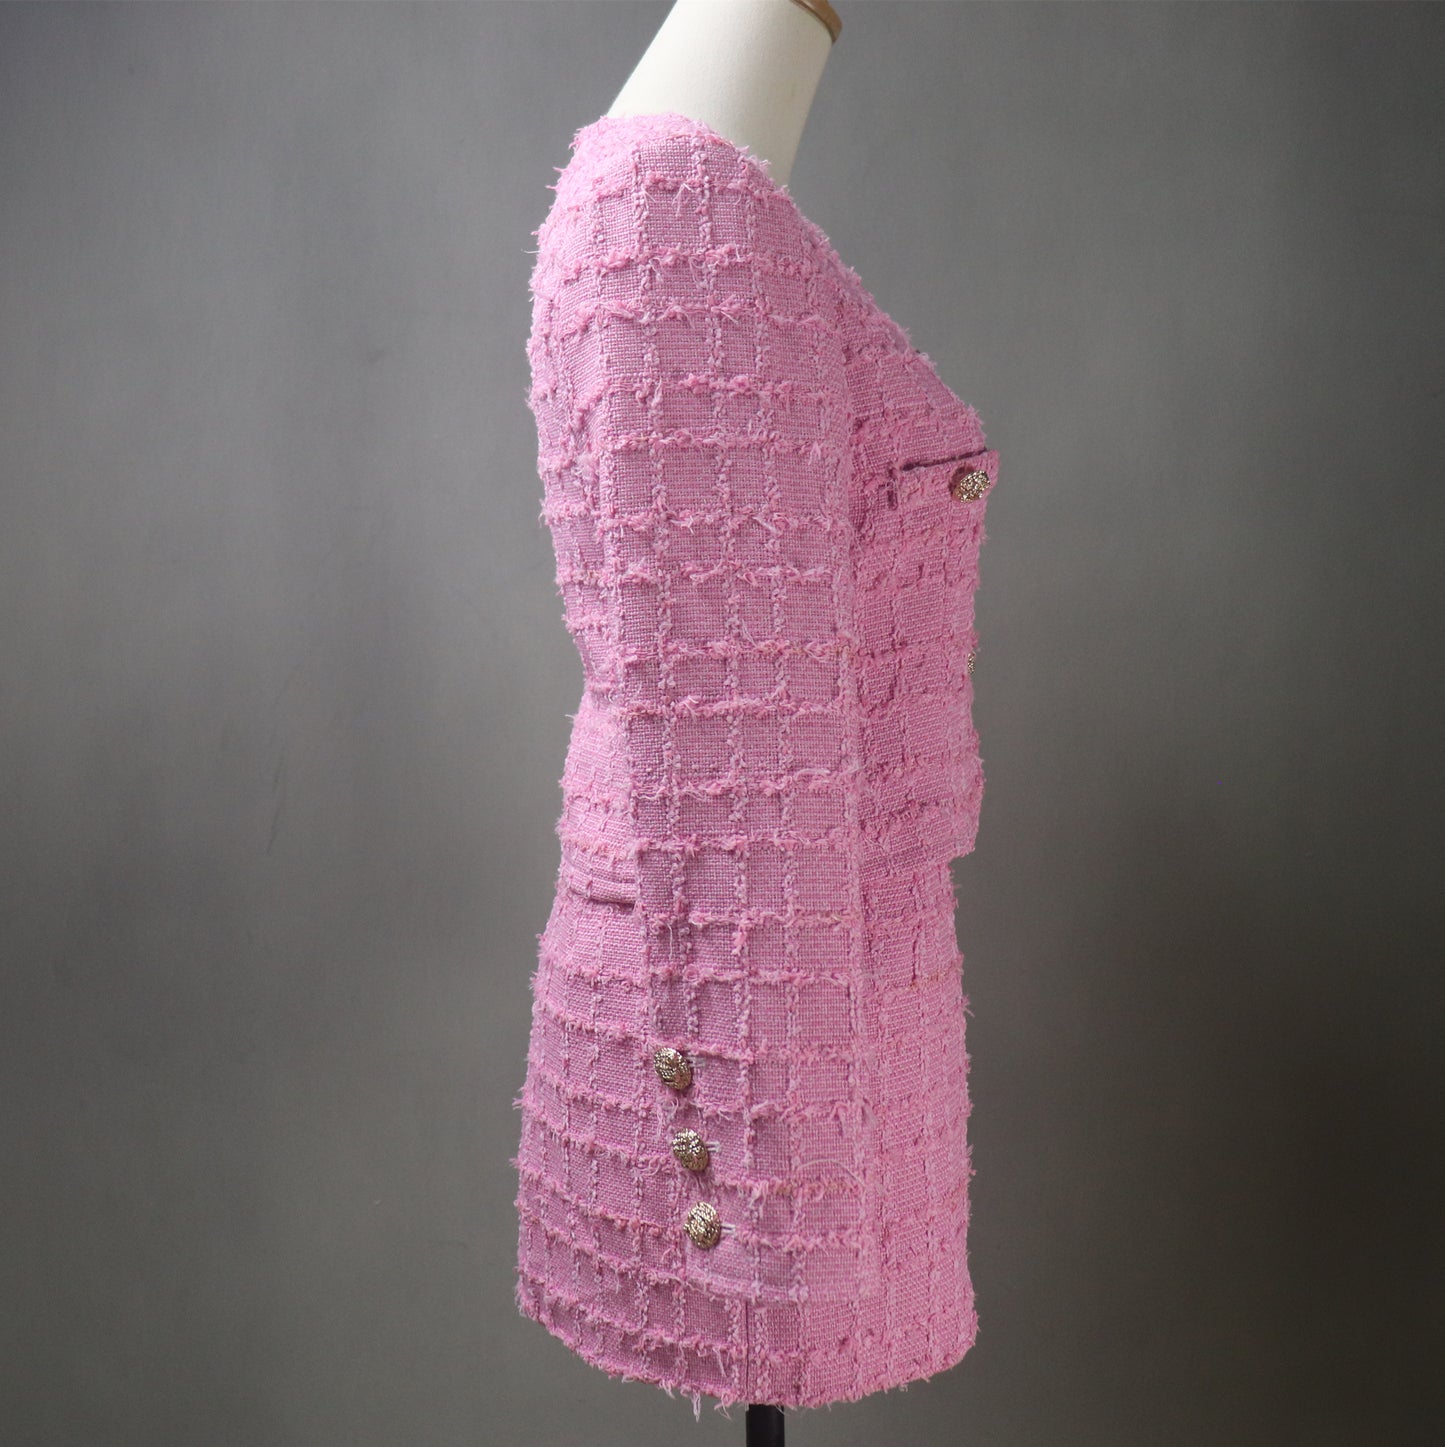 Pink Tweed Skirt Suit with Fluffy Checked Pattern